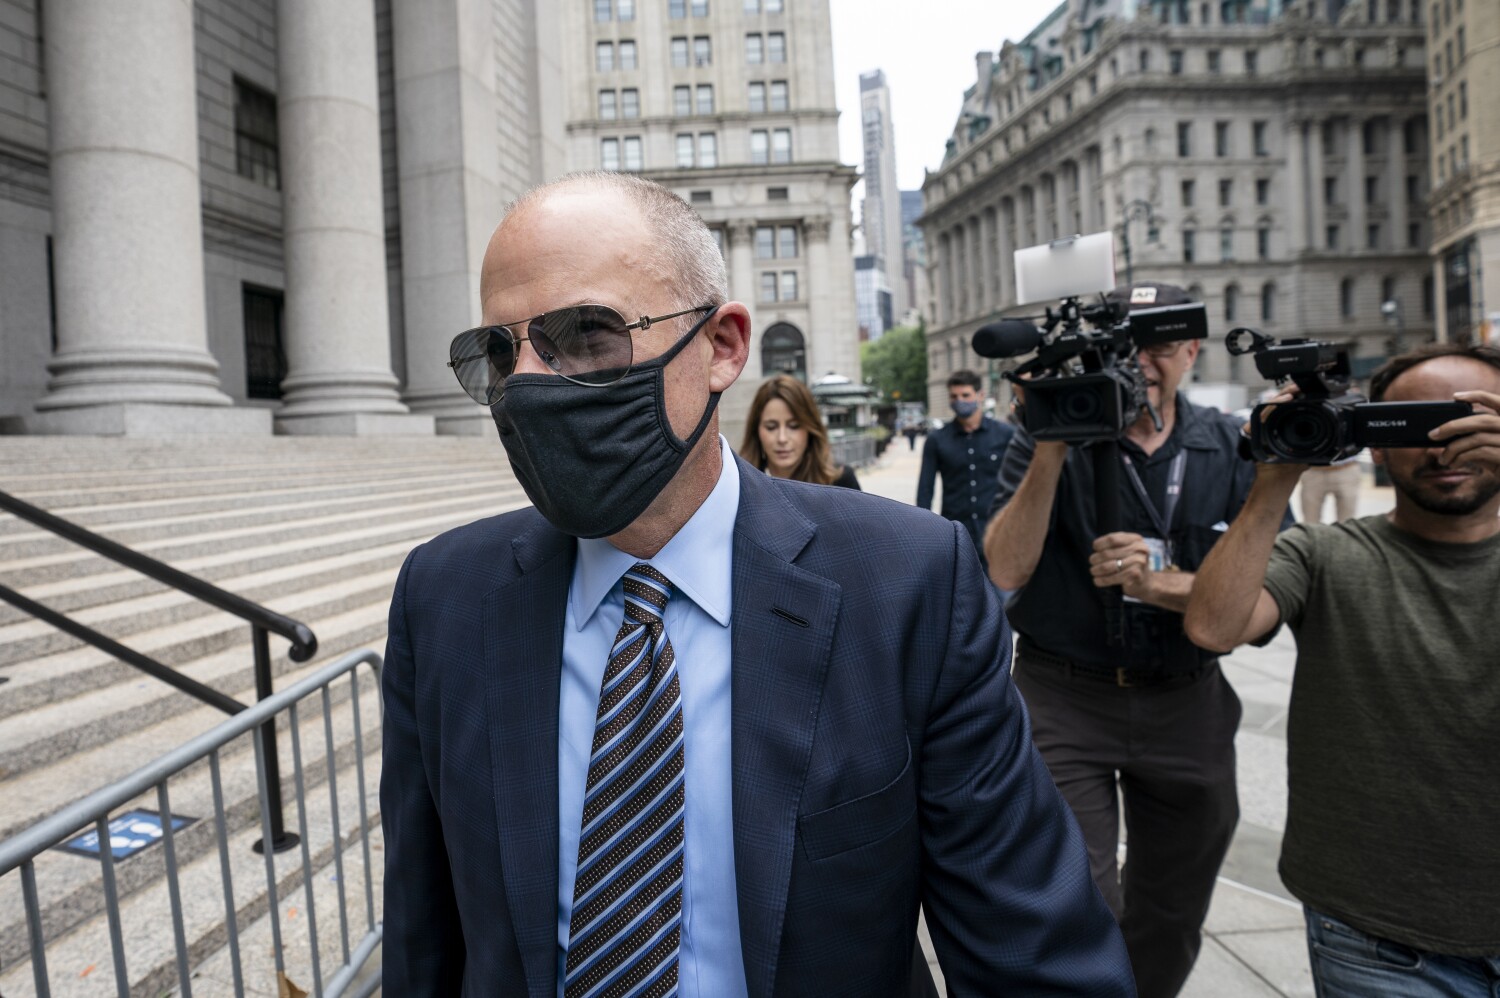 Michael Avenatti accused at fraud trial of stealing from client to buy private jet